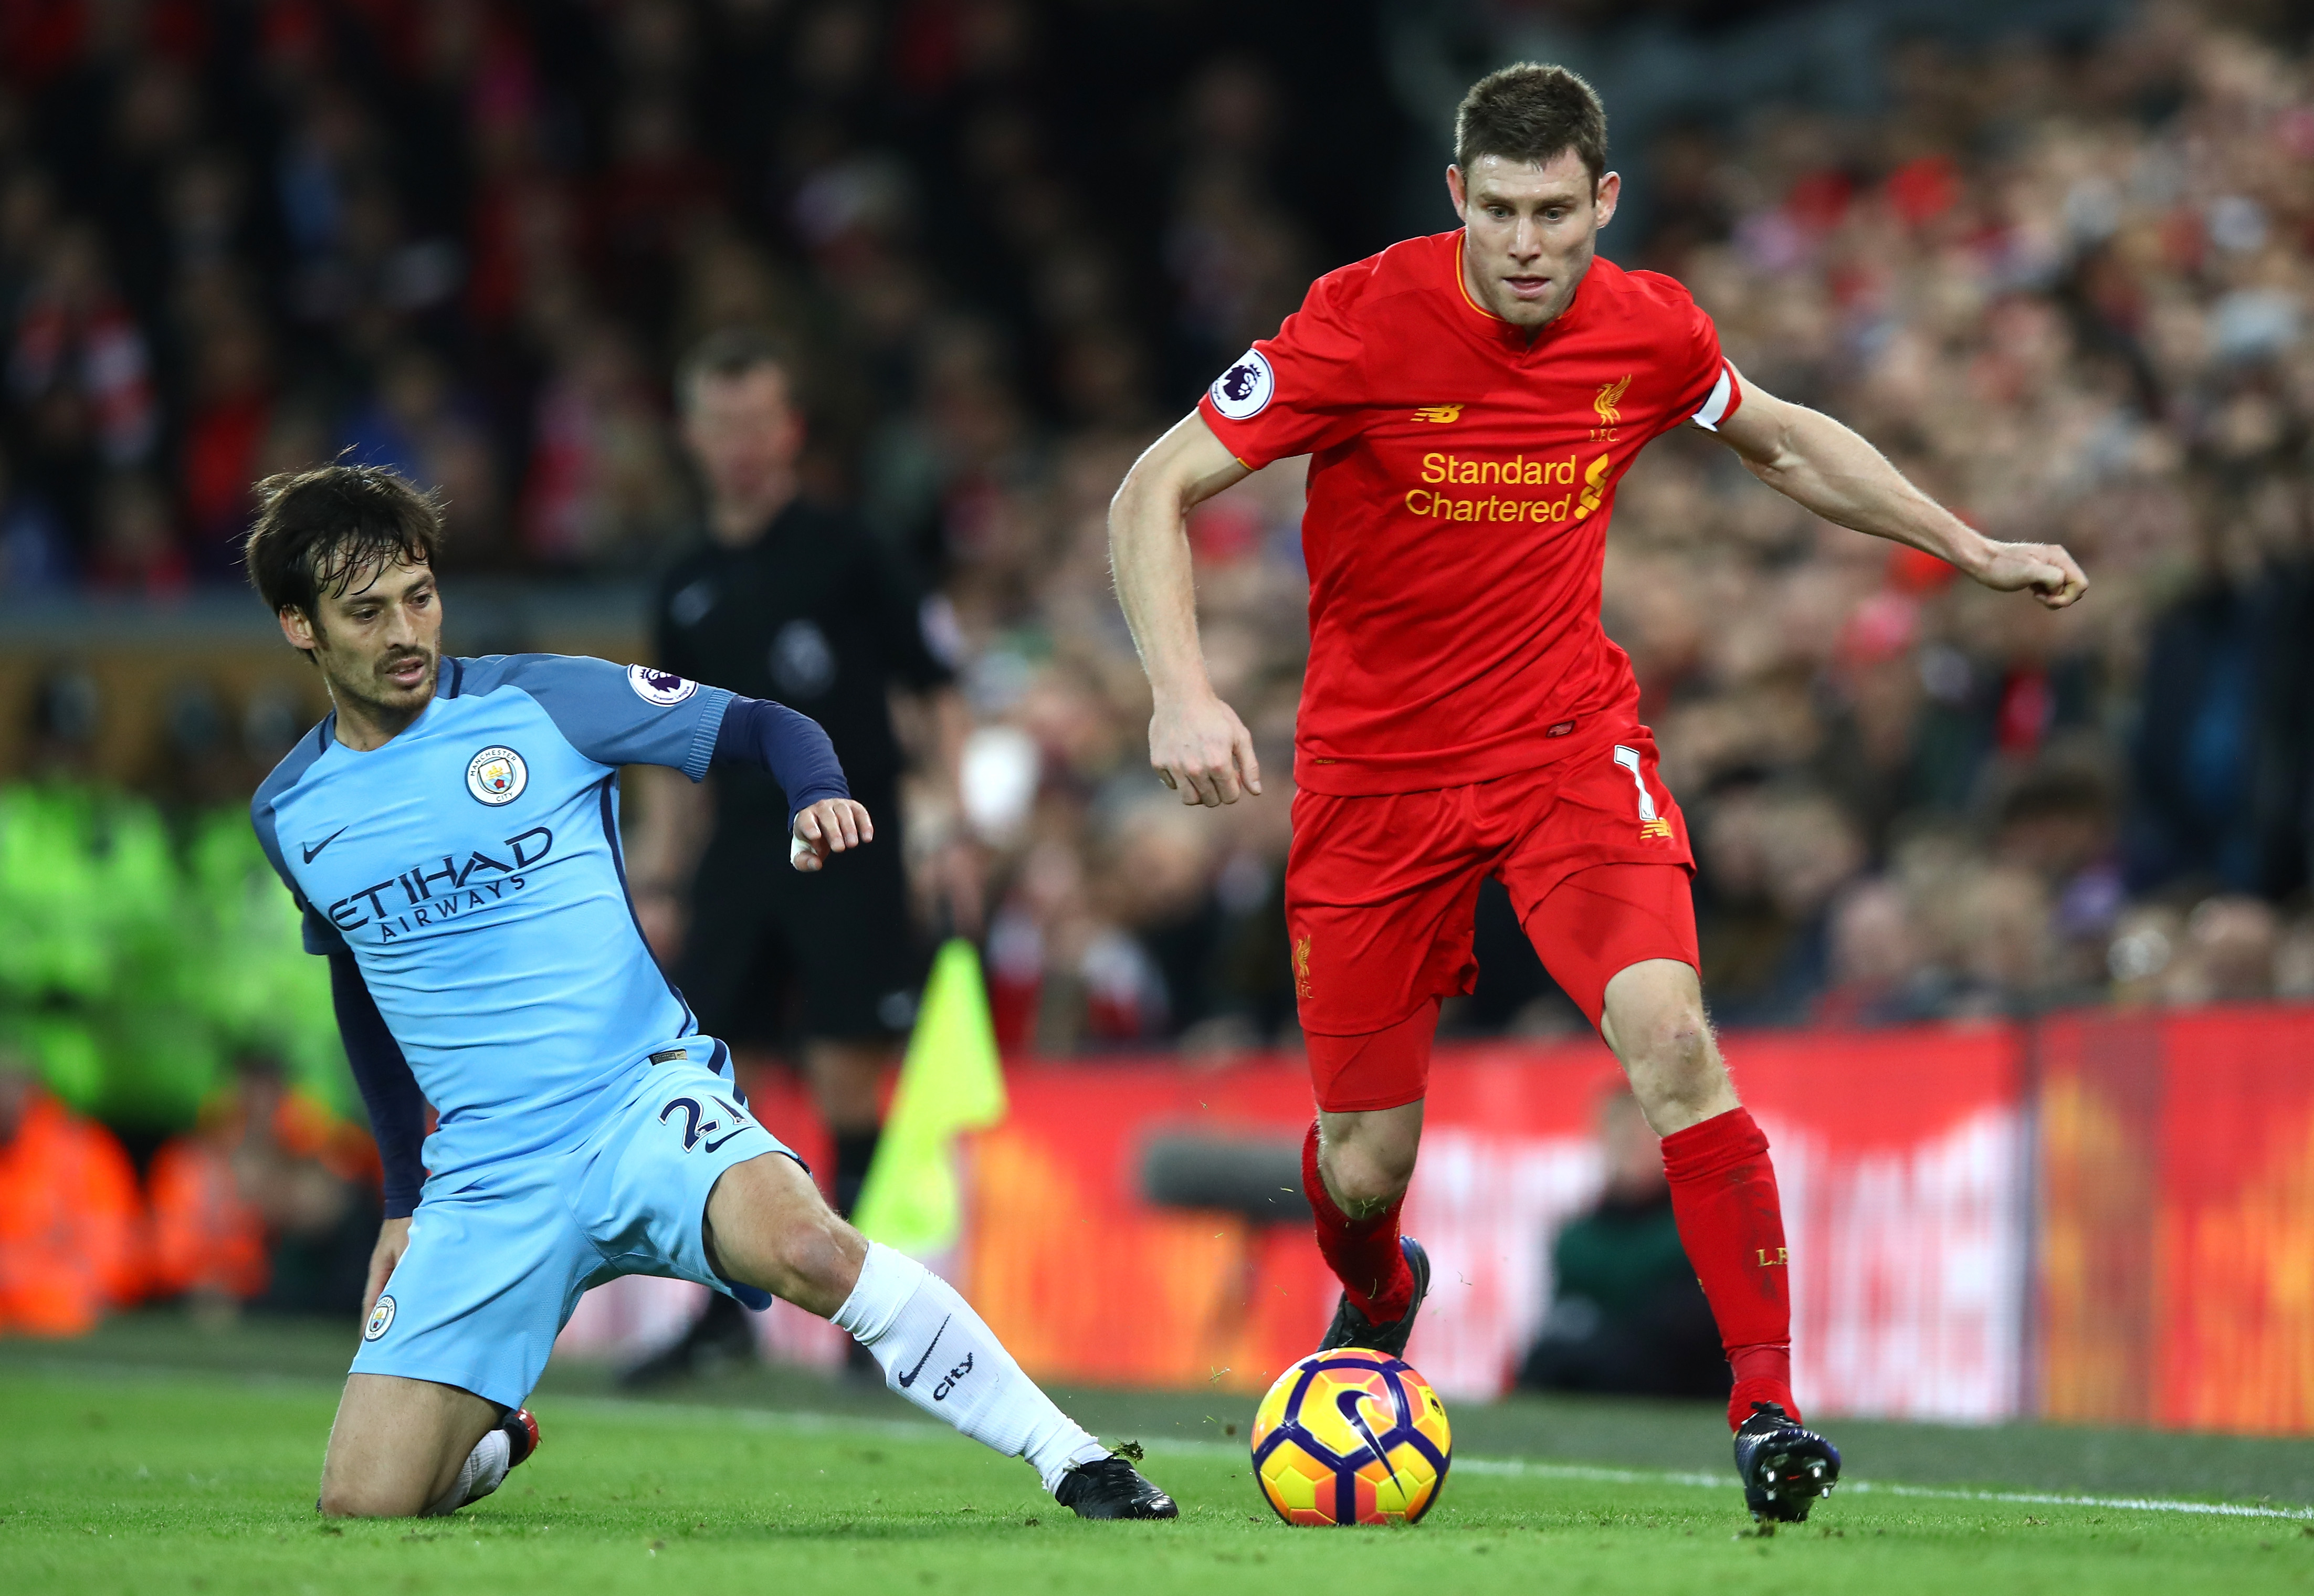 Liverpool vs Manchester City - Player ratings